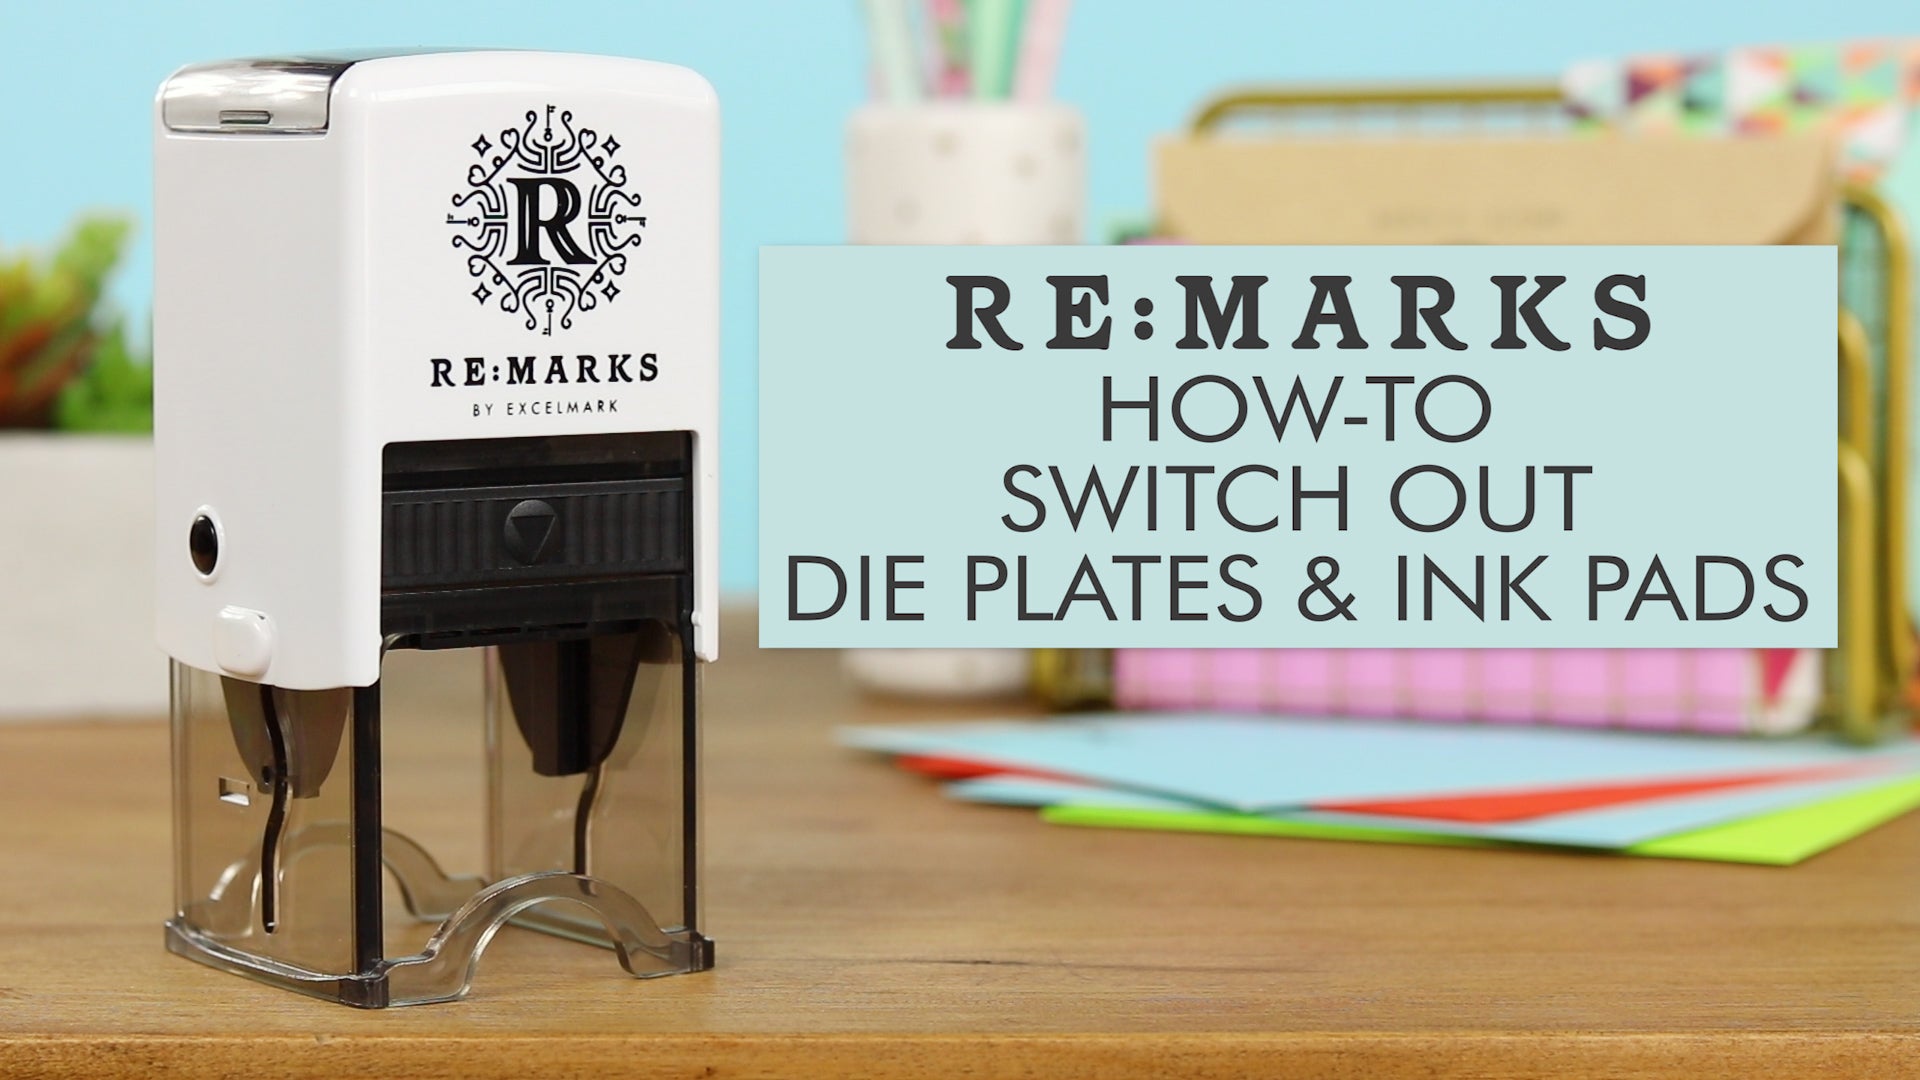 How to Change Re:Marks Die Plates